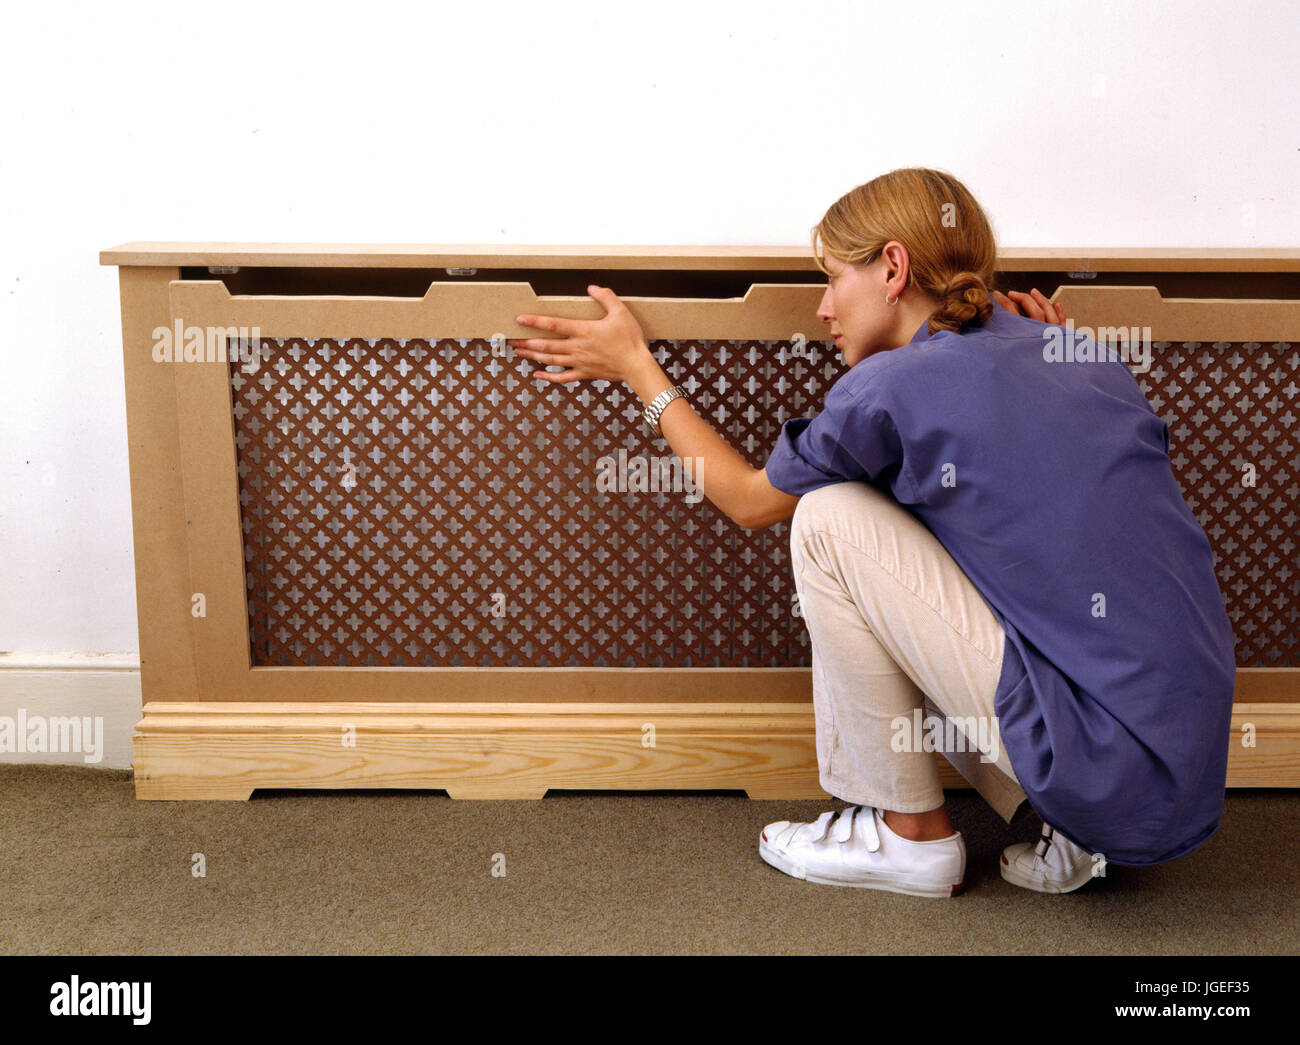 Woman fitting a radiator cover. Step x step craft & DIY projects Stock Photo